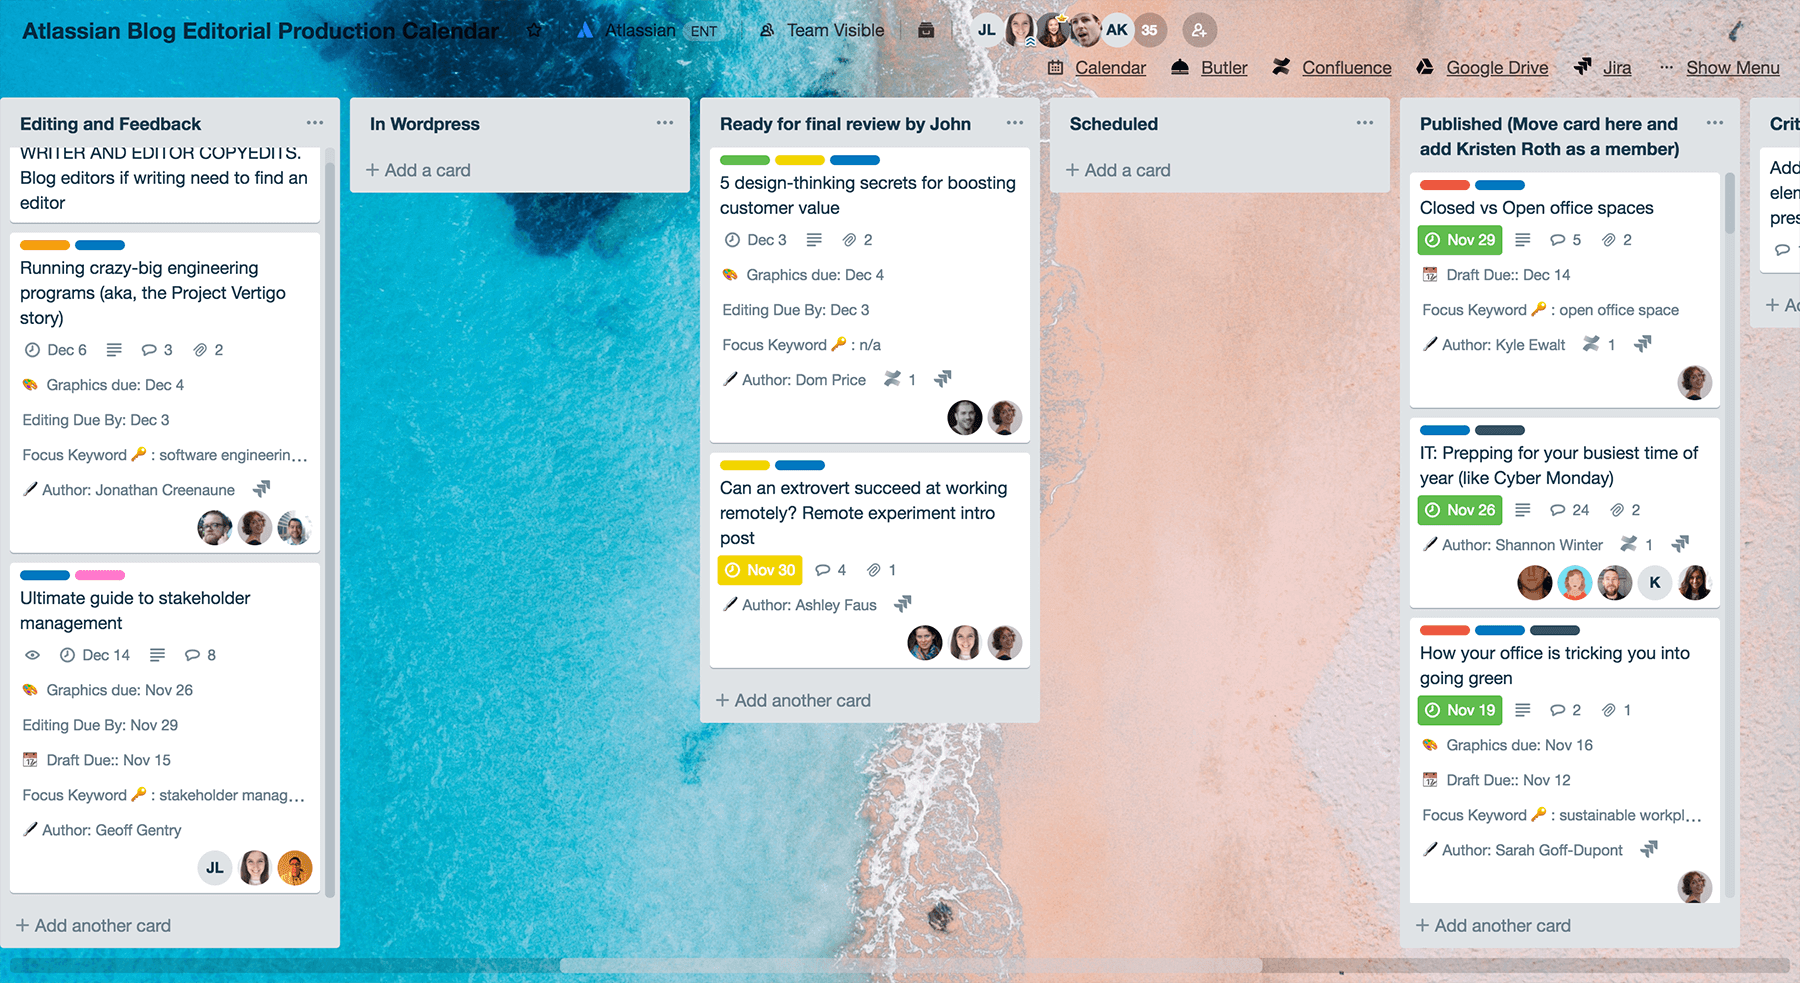 Trello board with cards on keeping up to date